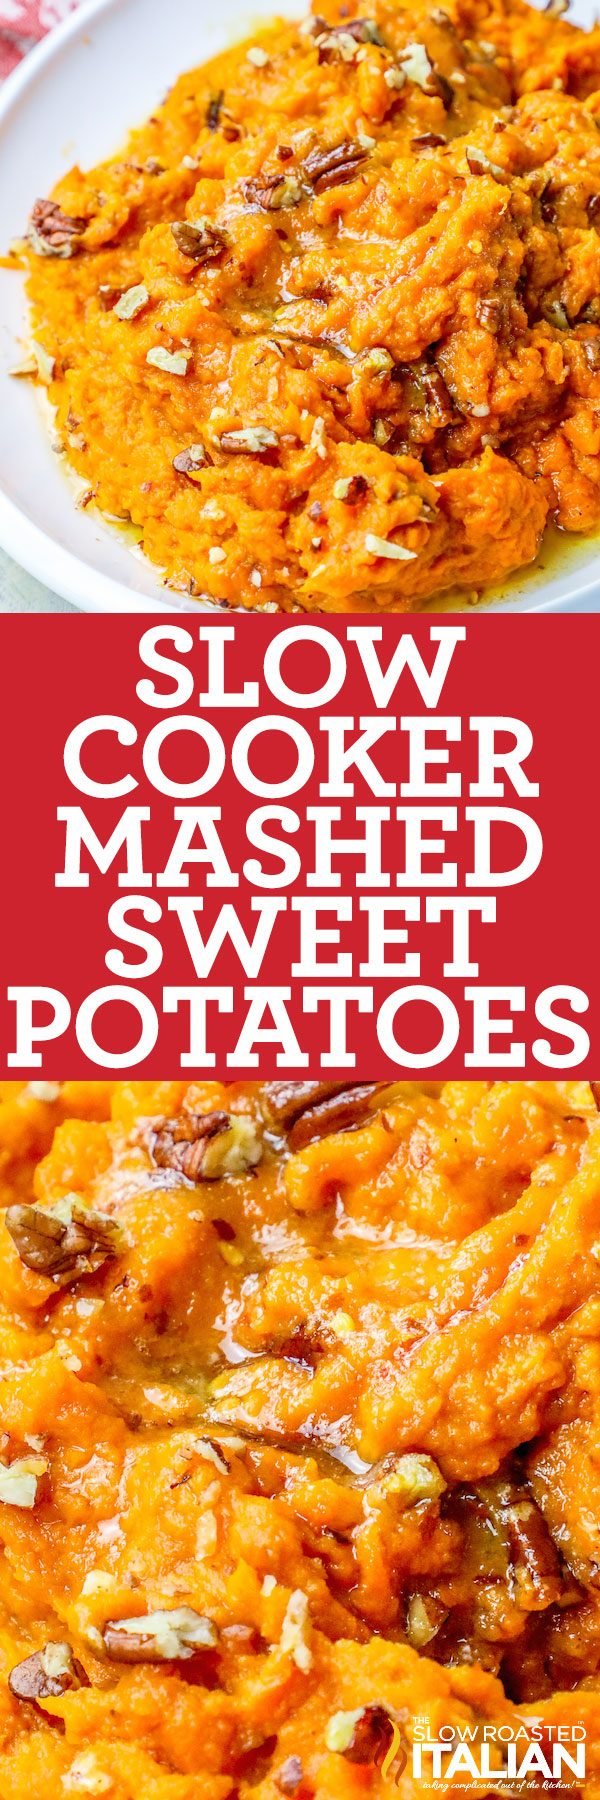 slow cooker mashed sweet potatoes collage; close up and on a white plate.